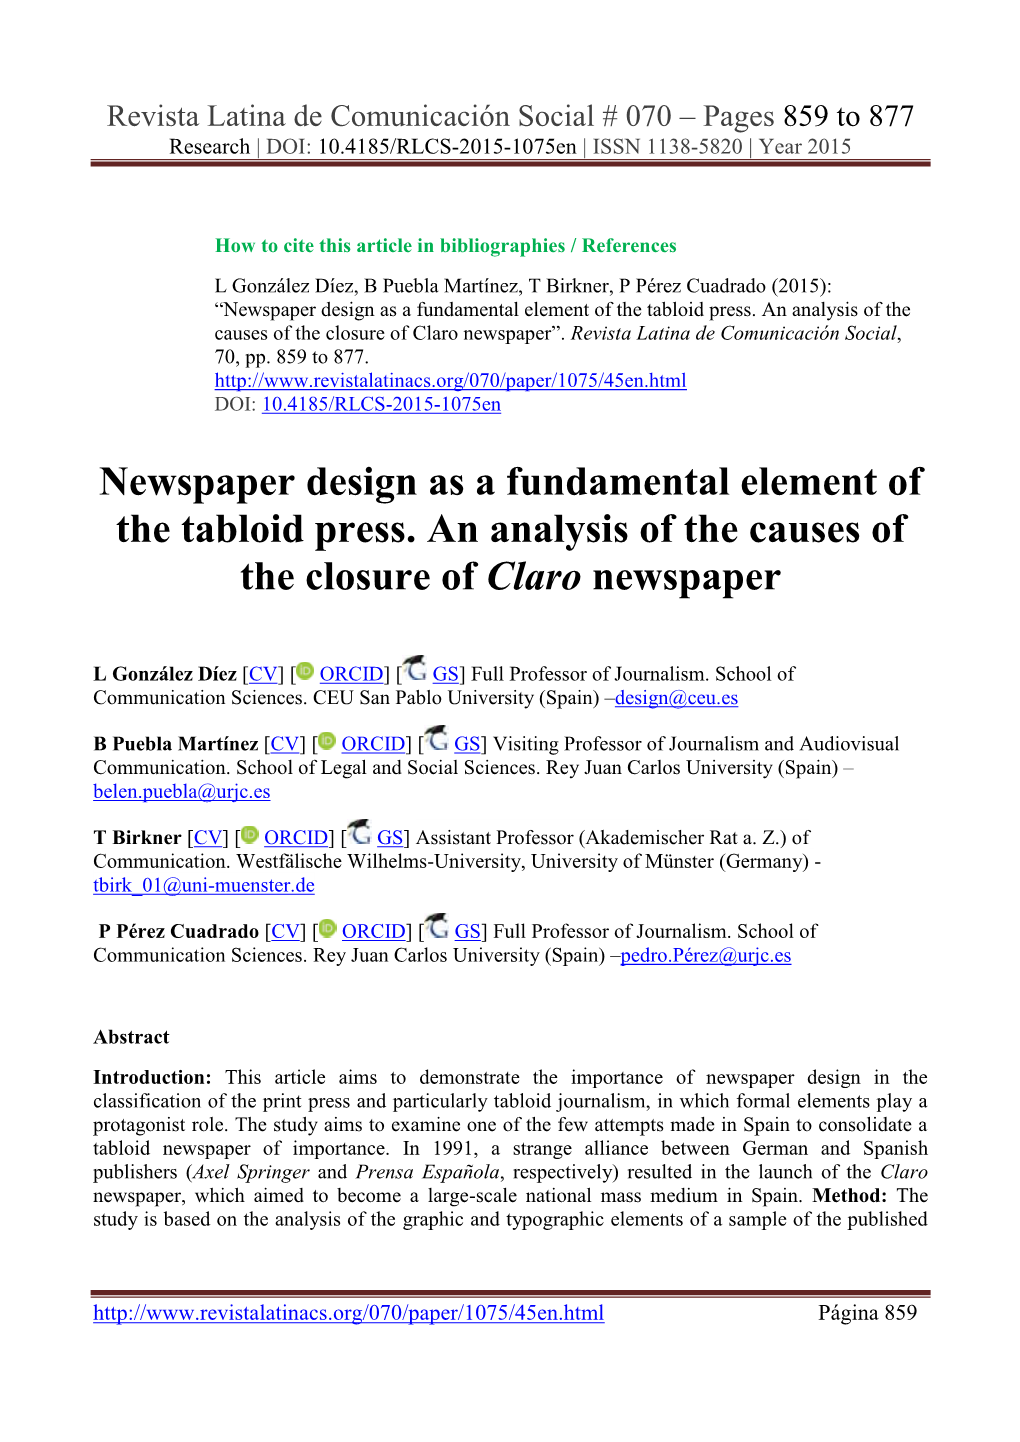 Newspaper Design As a Fundamental Element of the Tabloid Press. an Analysis of the Causes of the Closure of Claro Newspaper”